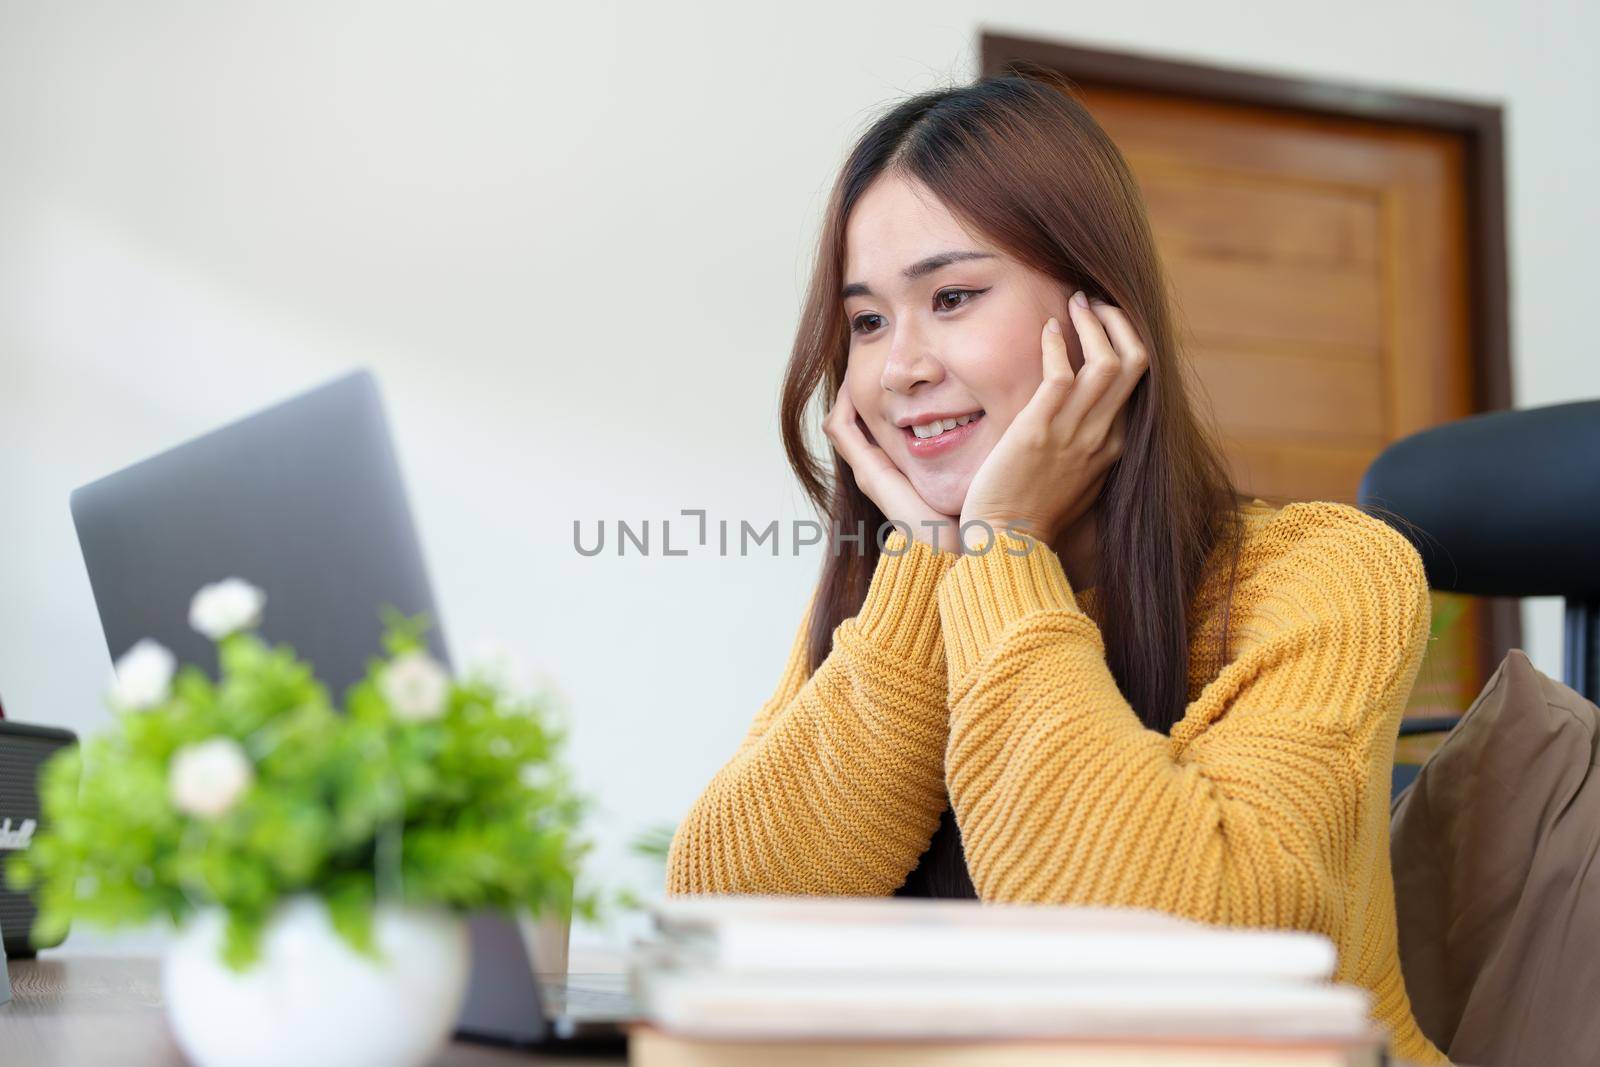 woman smiling happily while using computer at home.